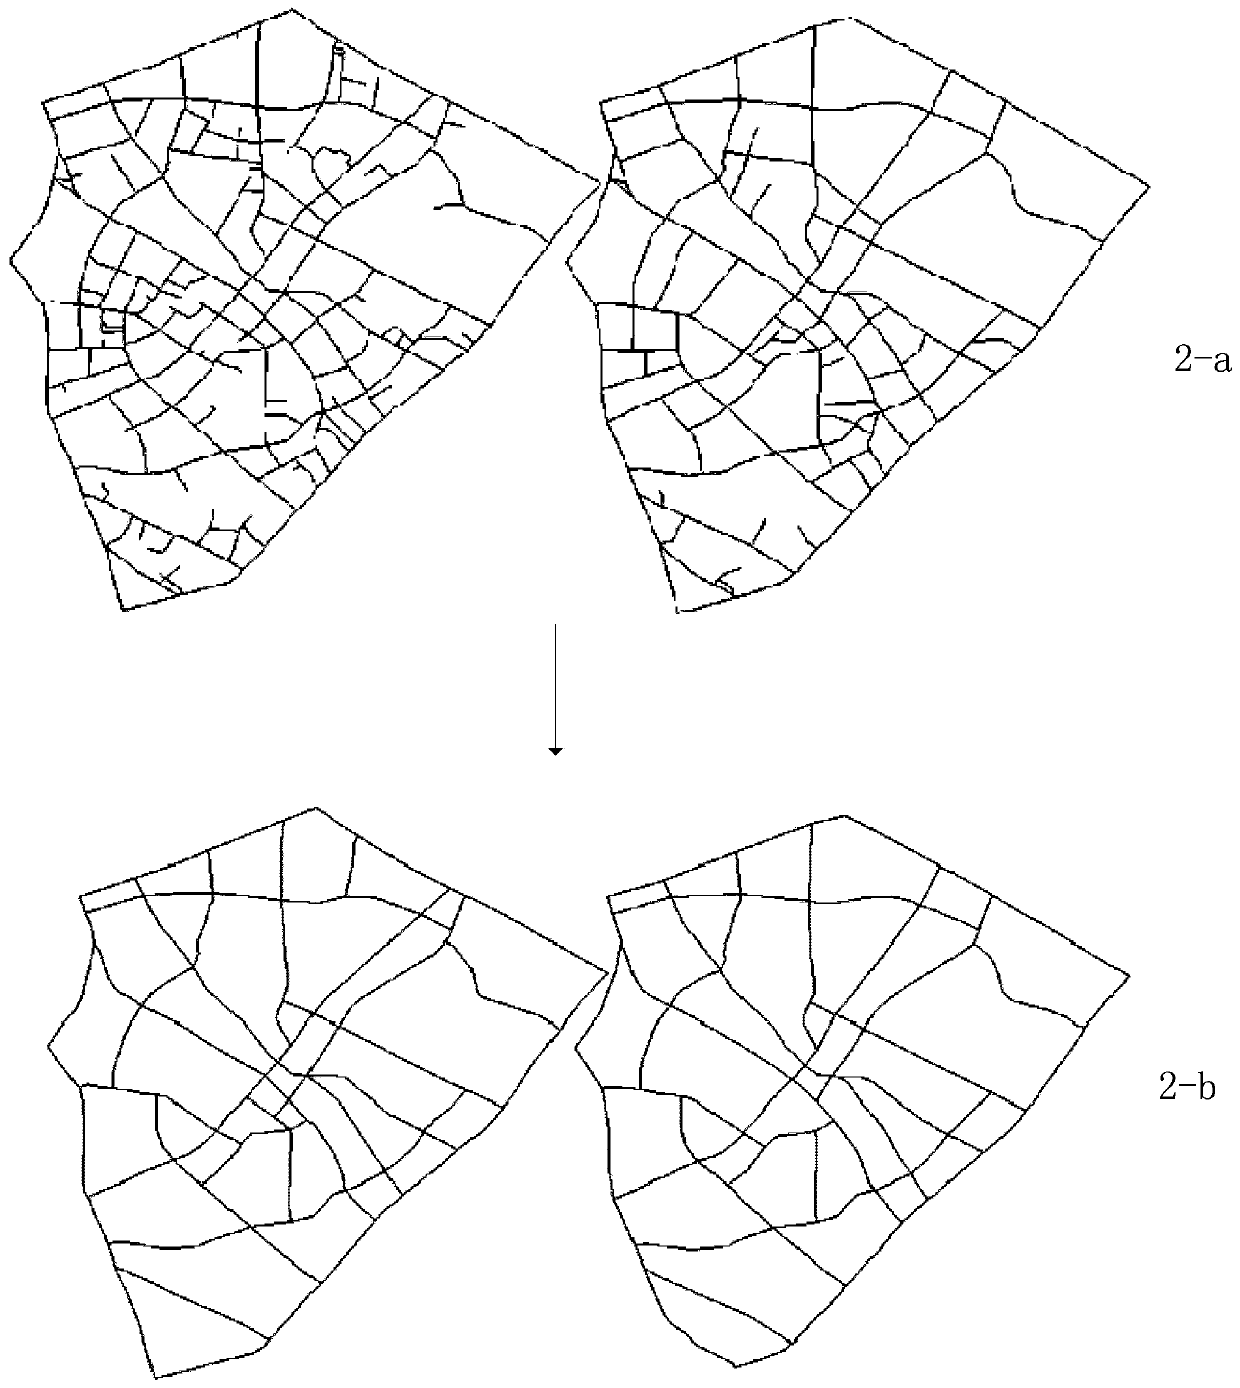 A Multi-level Vector Road Network Matching Method Based on Delaunay Triangulation